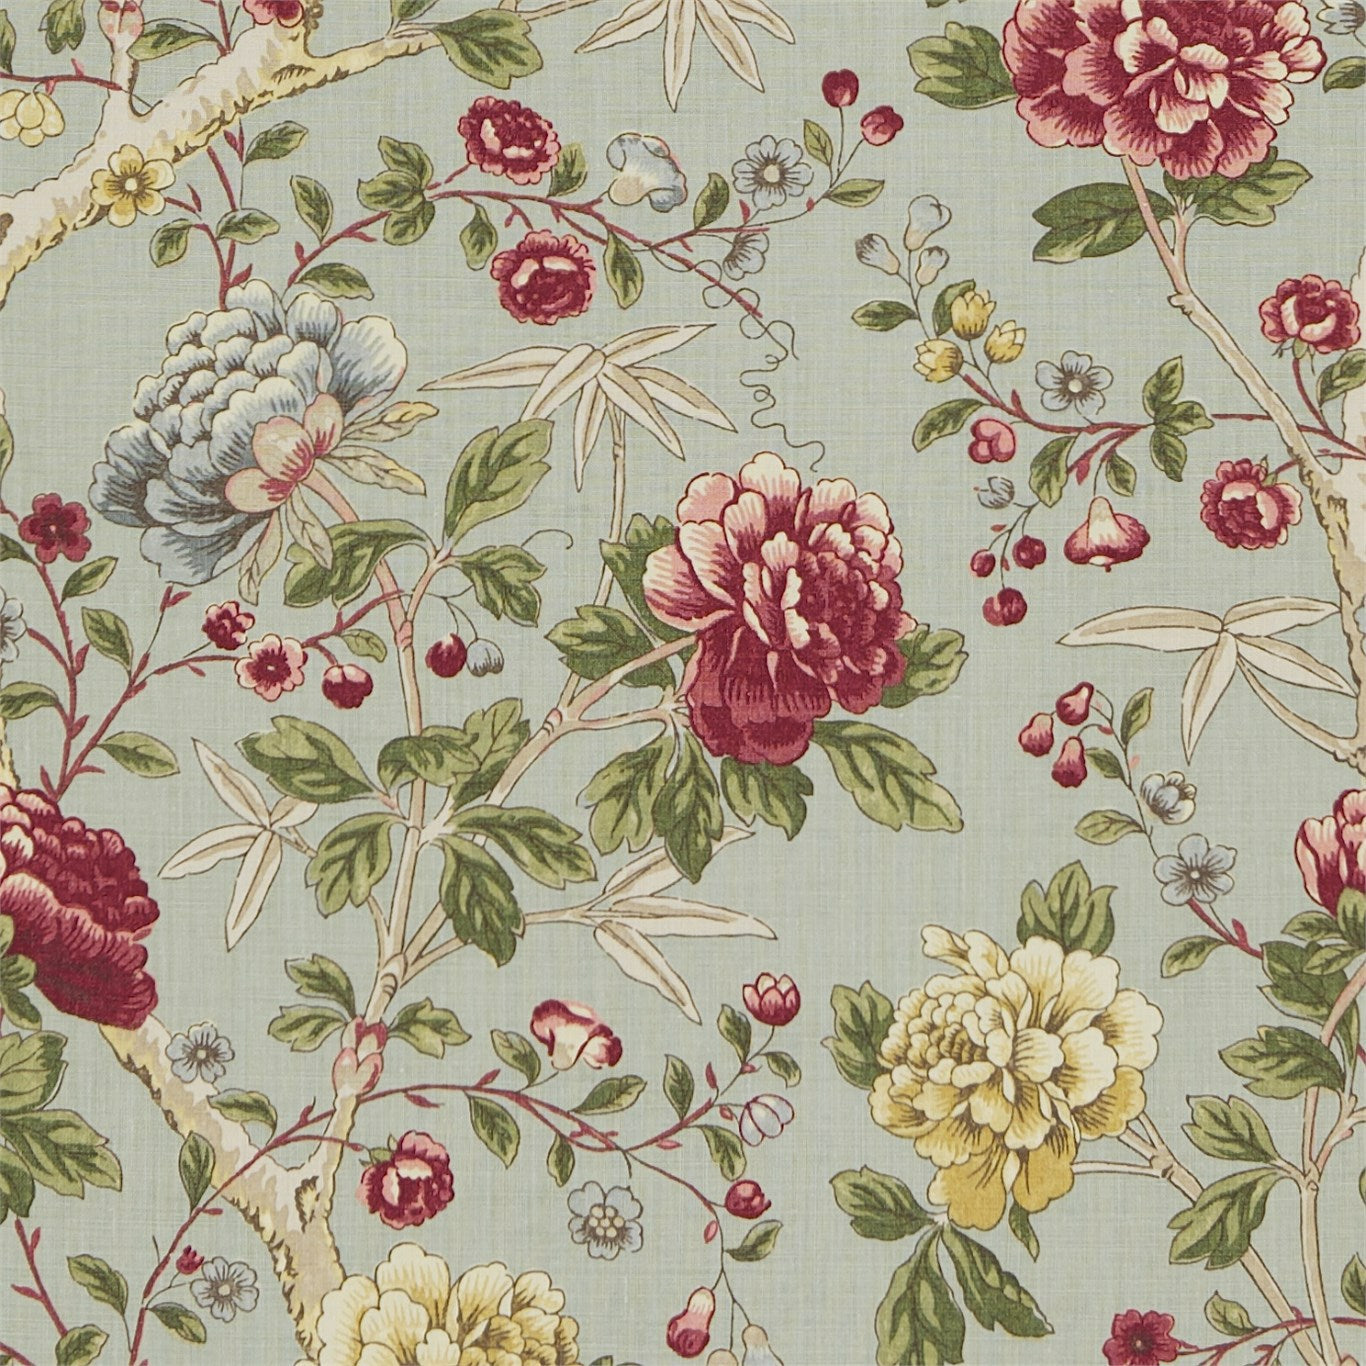 Tangley Fabric by Morris & Co.